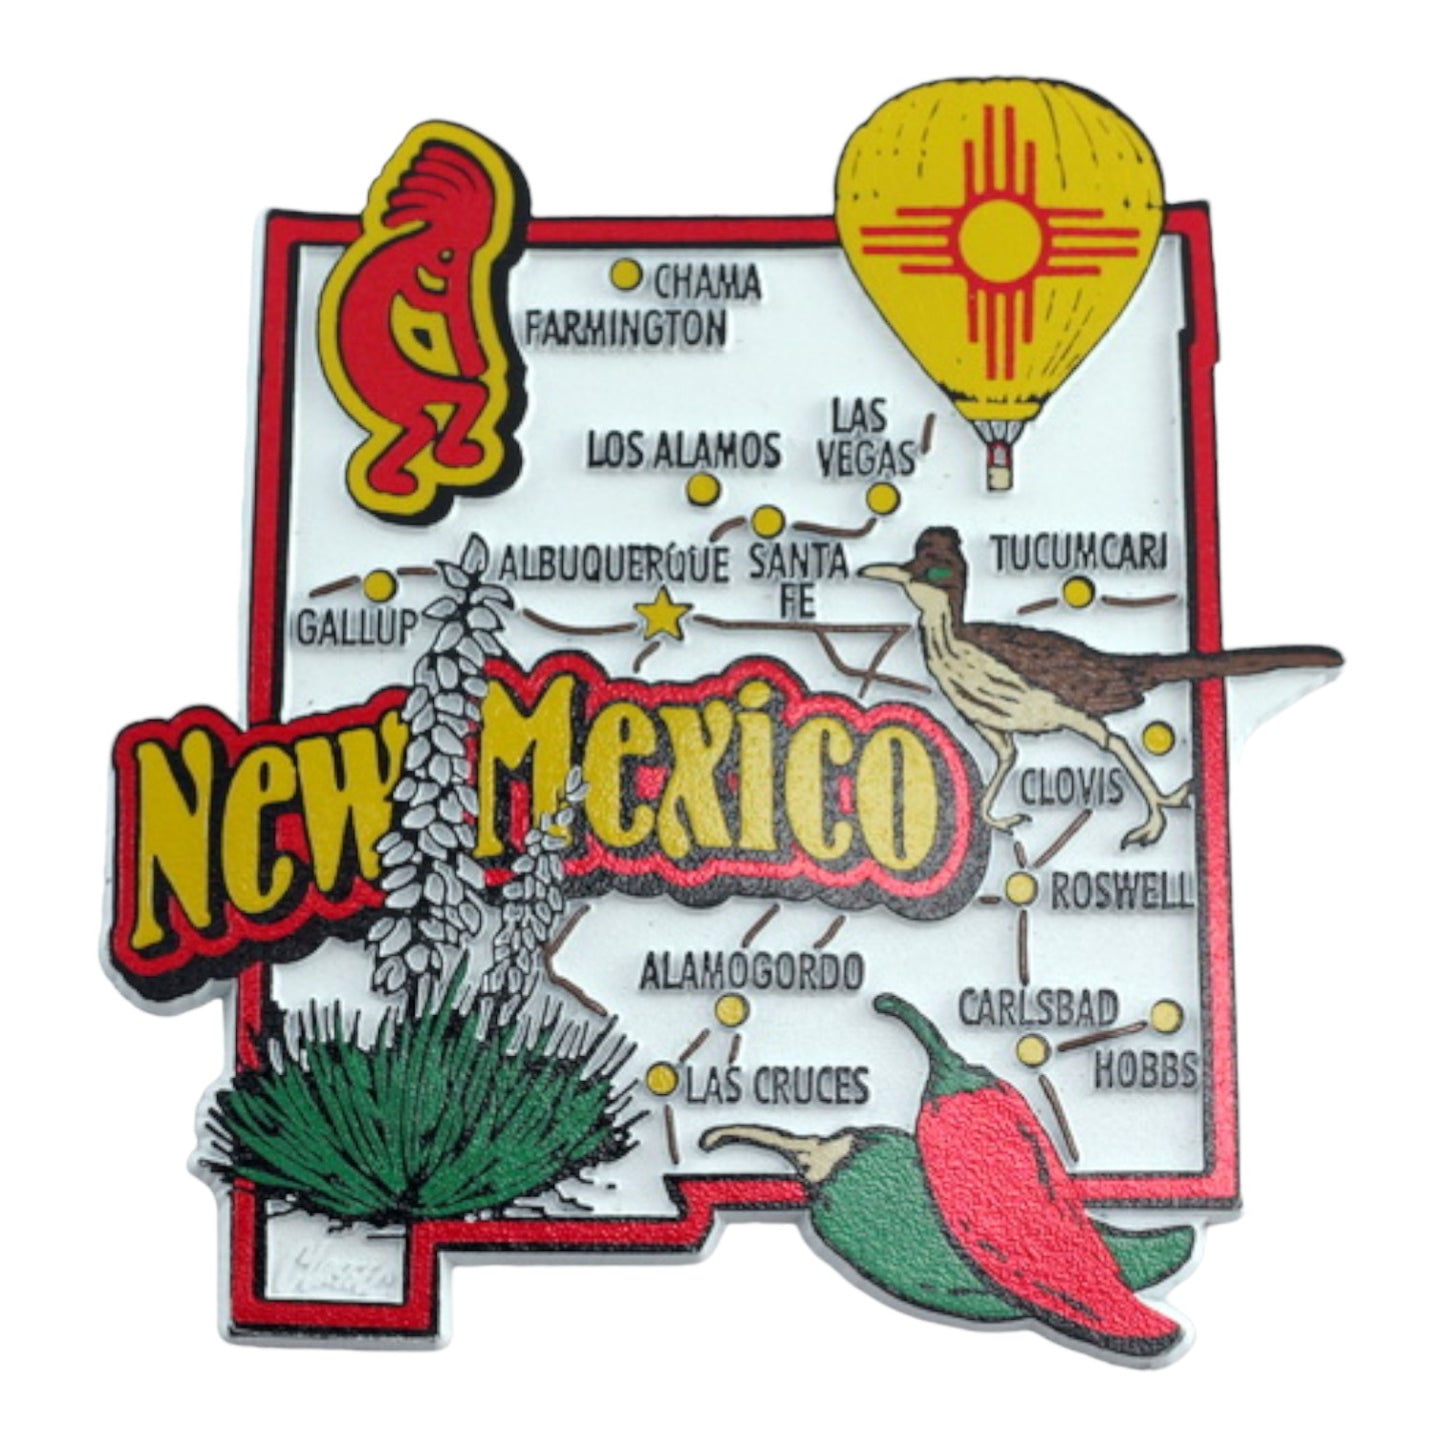 New Mexico State Map and Landmarks Collage Fridge Souvenir Collectible Magnet